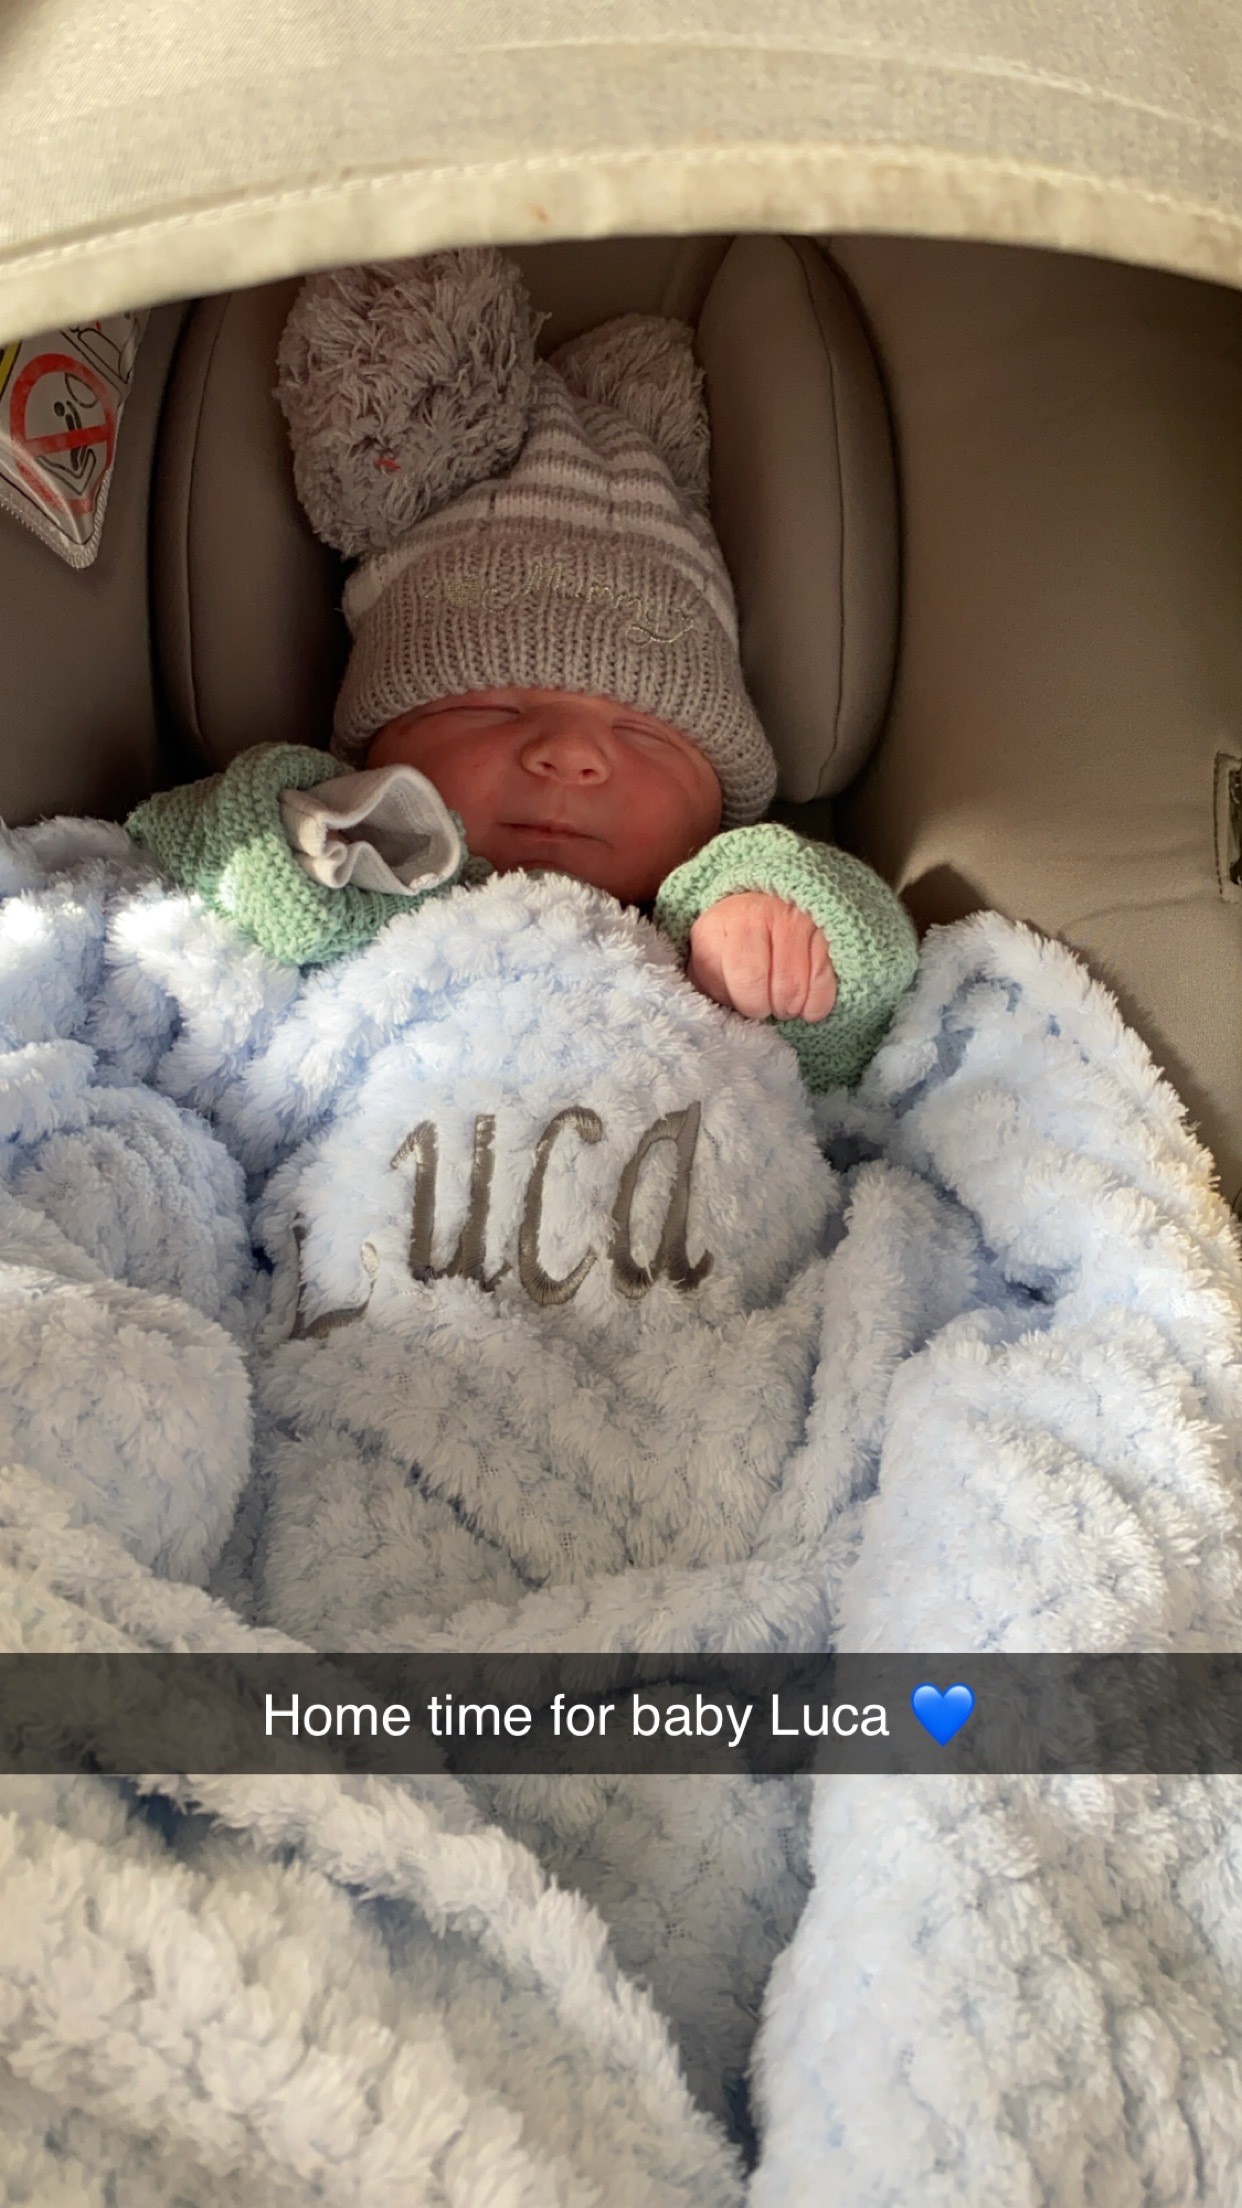 Home time for Luca Oare.